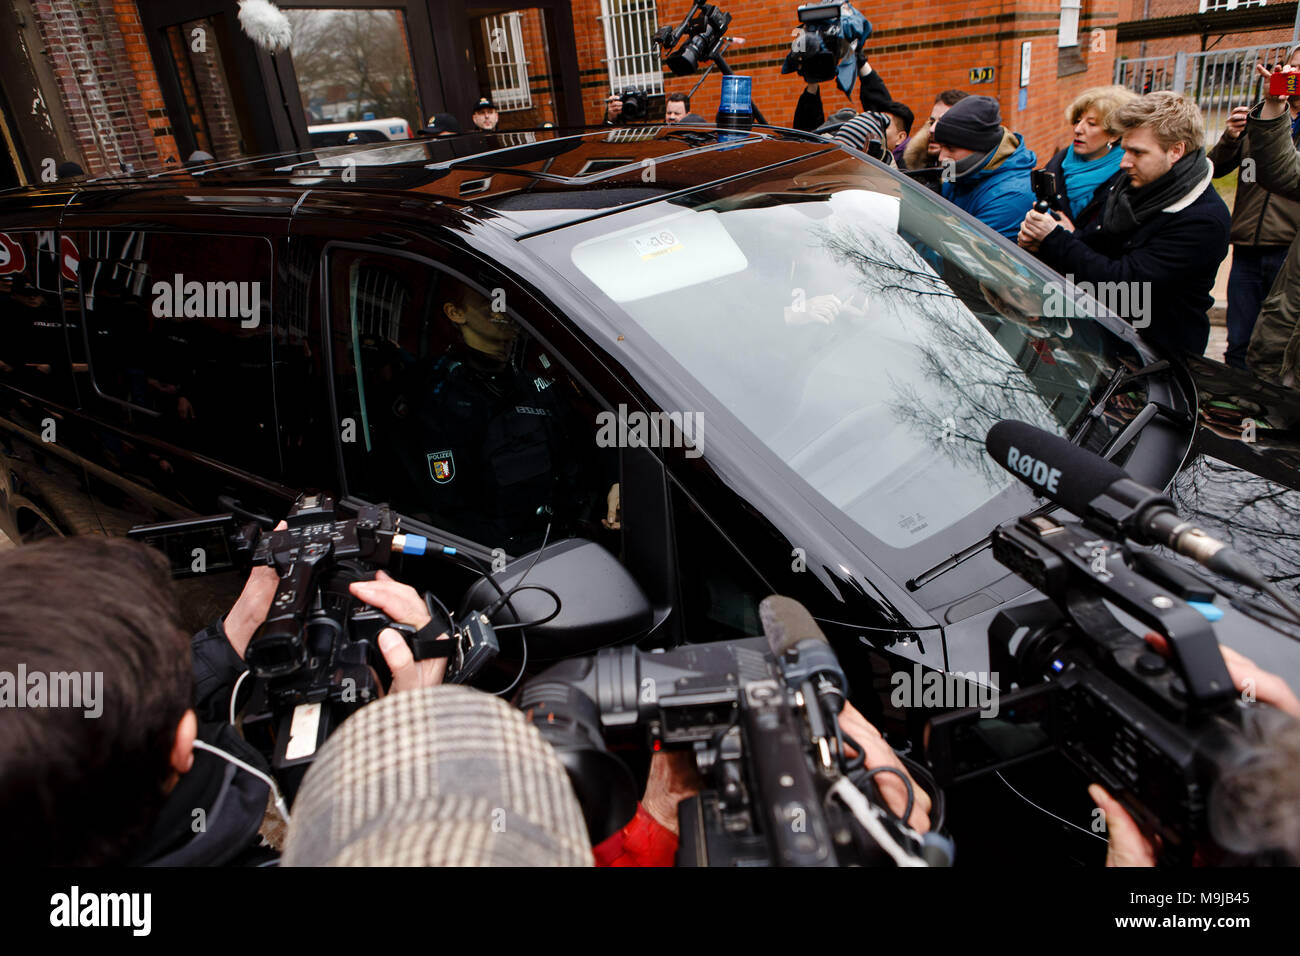 26 March 2018, Germany, Neumuenster: A black van of the police leaves the correctional facility with blue light. Carles Puigdemont, Former President of the Generalitat of Catalonia, was brought here after being detained. Photo: Frank Molter/dpa Stock Photo